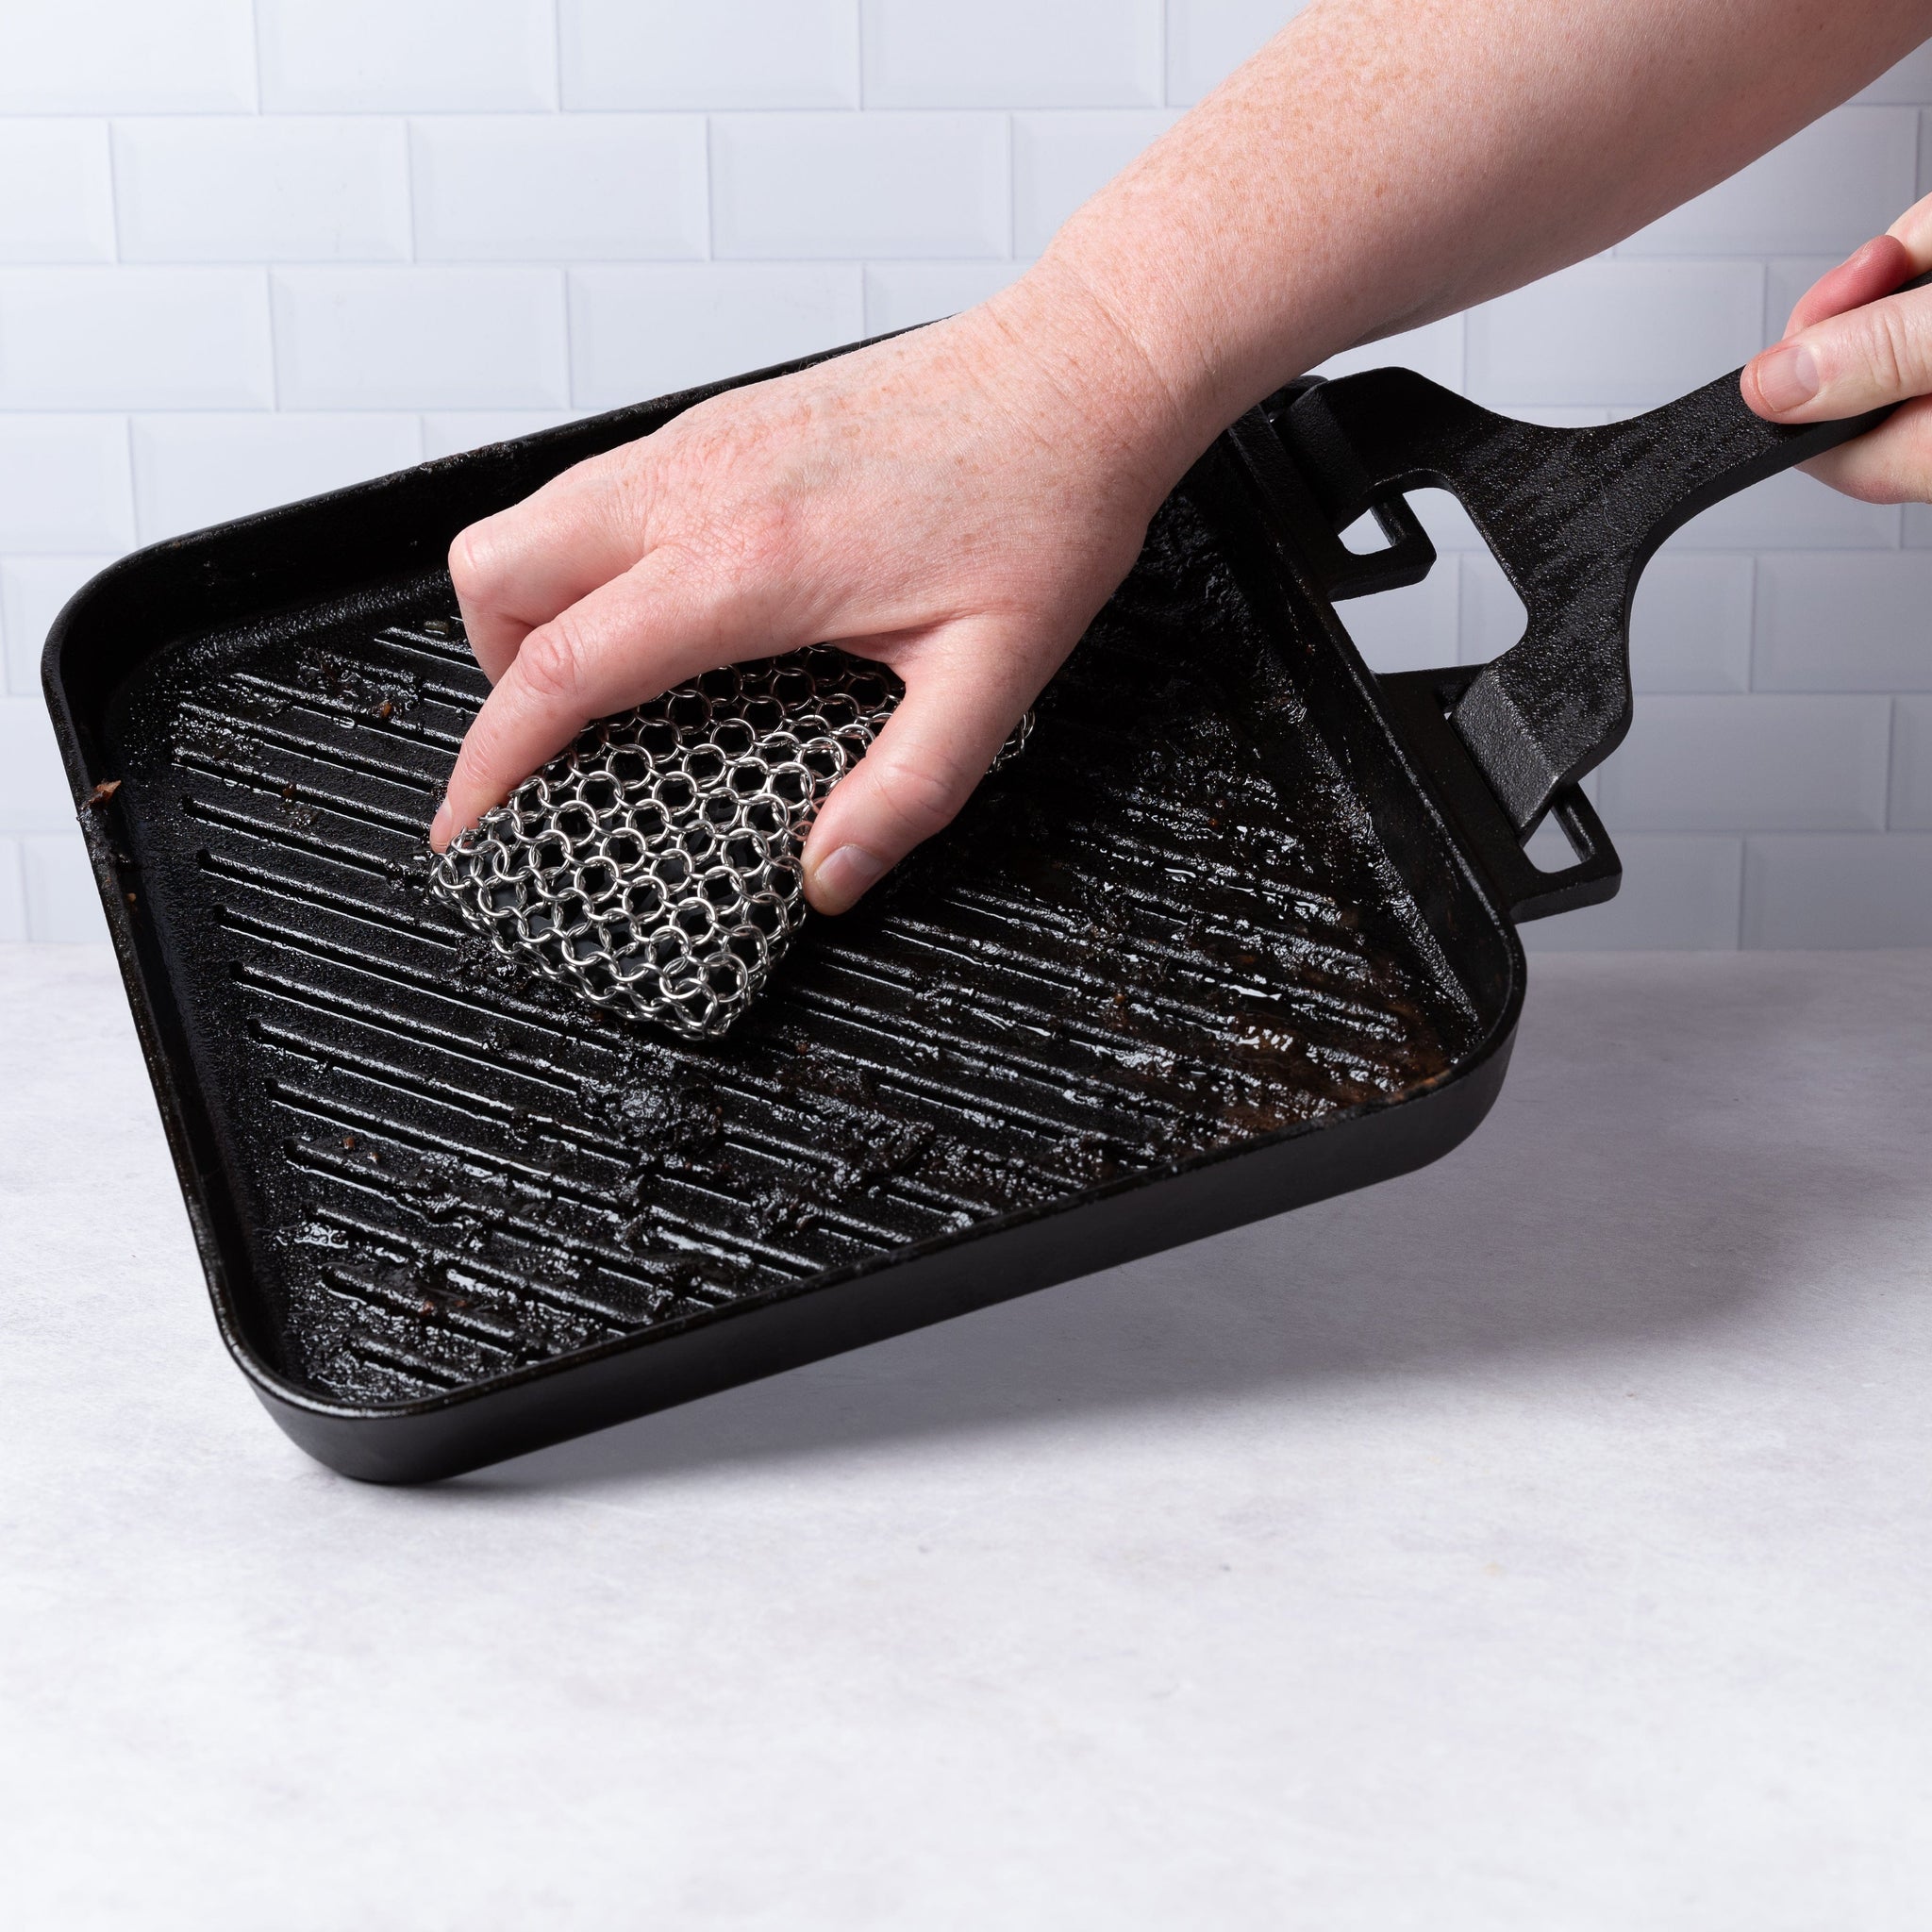 Thermomix-New-Zealand Thermomix NZ Cast Iron Scrubber